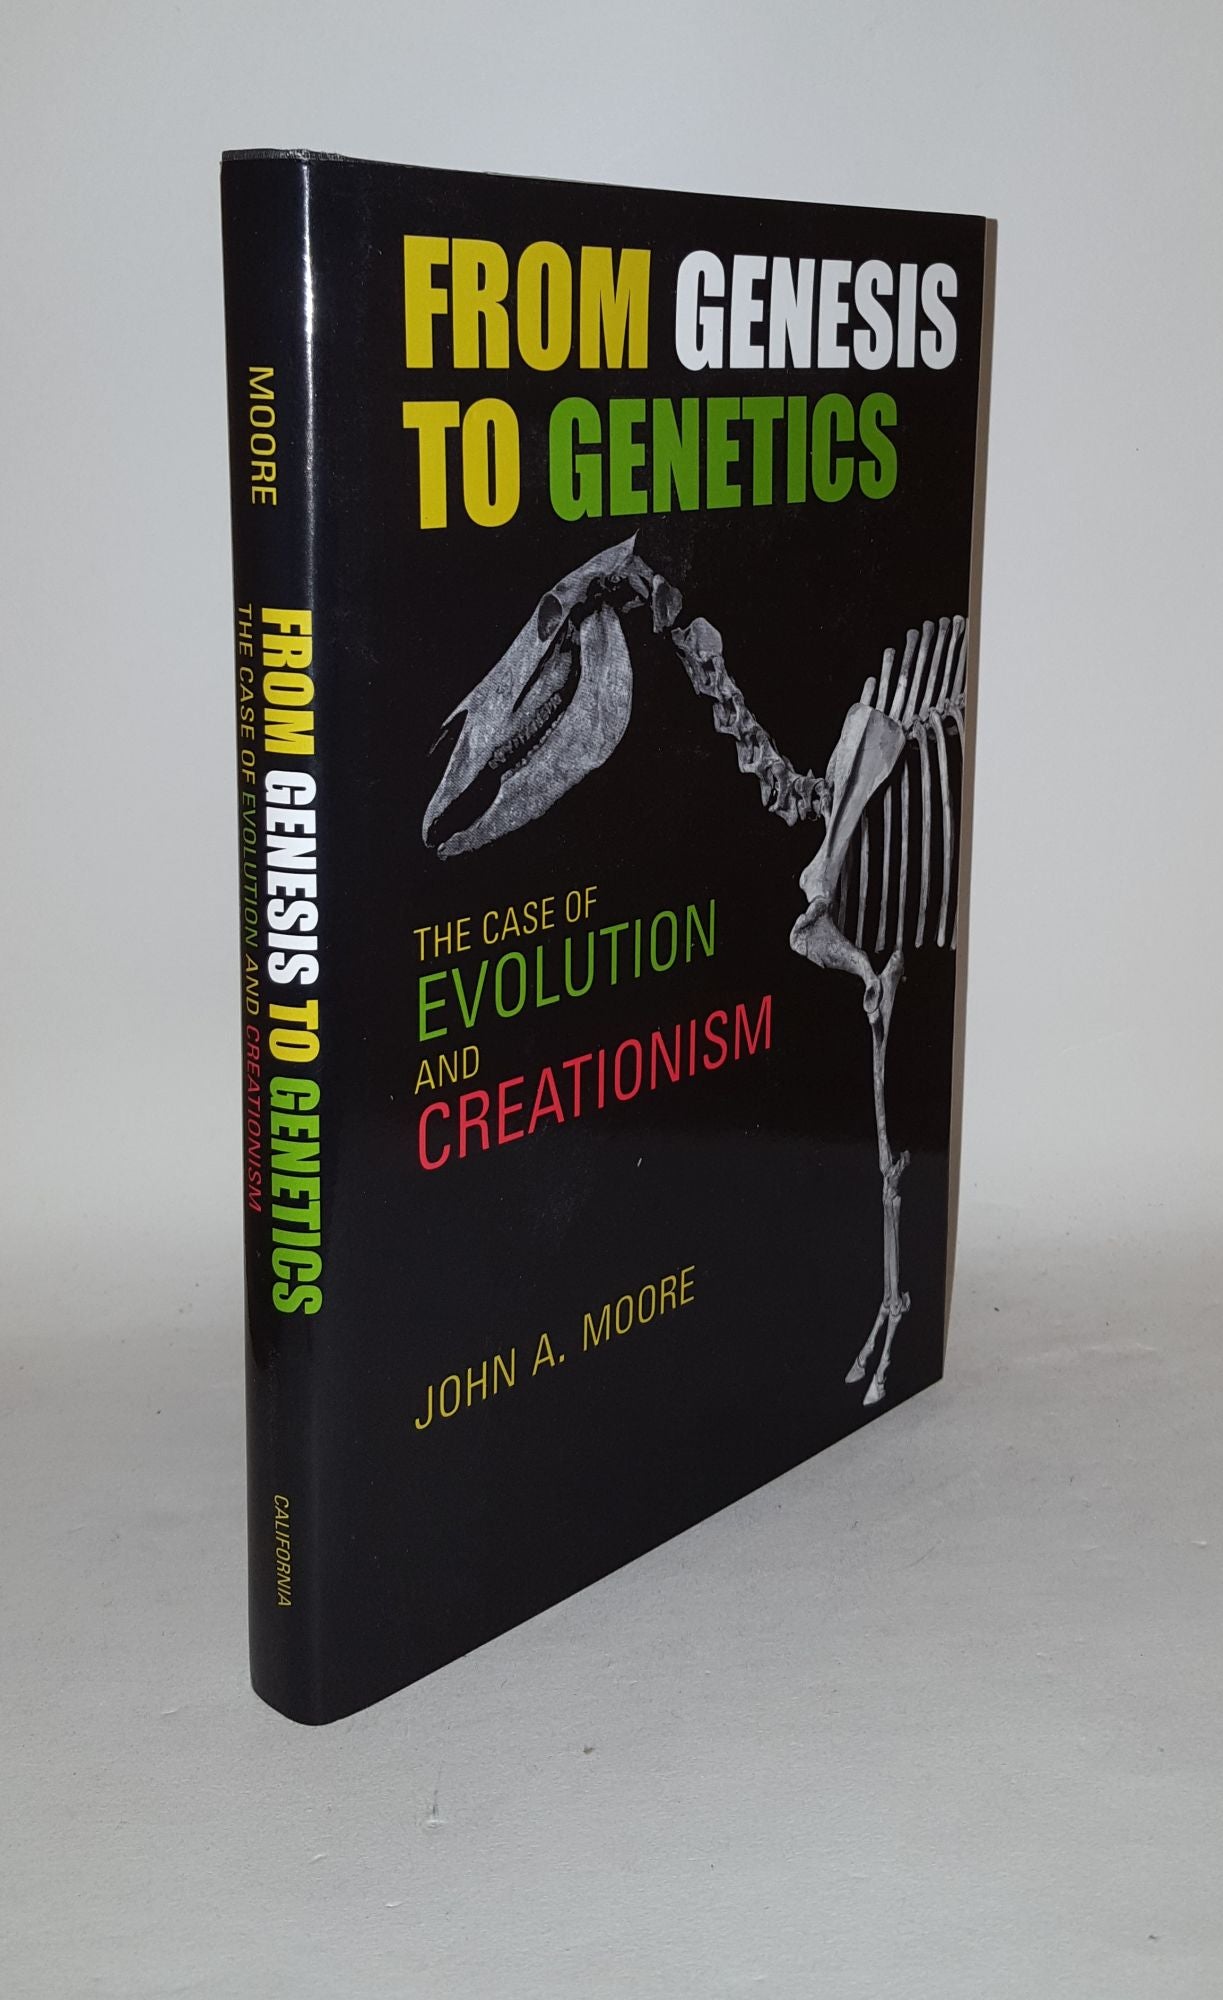 MOORE John A. - From Genesis to Genetics the Case of Evolution and Creationism